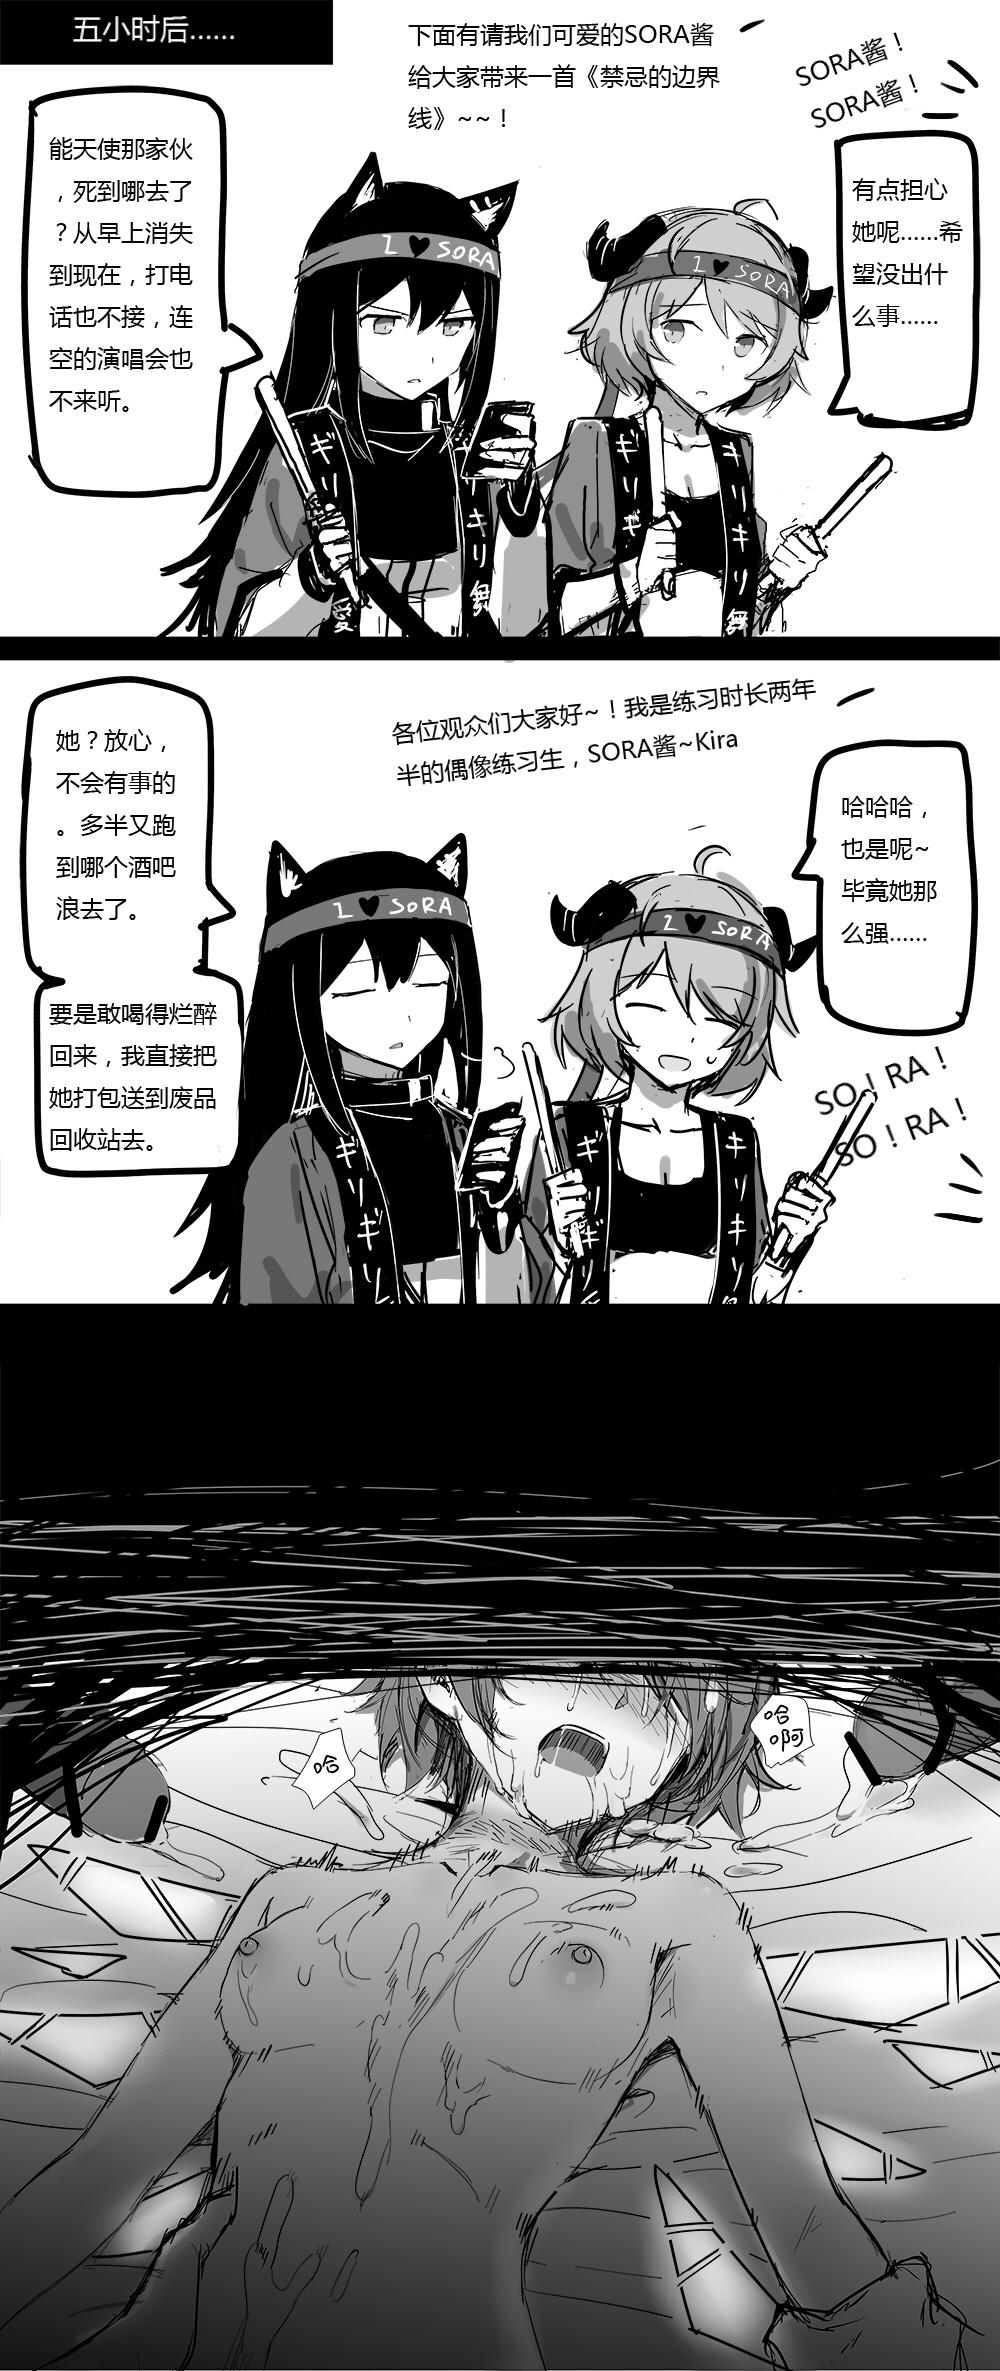 Leaked 无能狂怒 - Arknights Free Fuck - Page 10